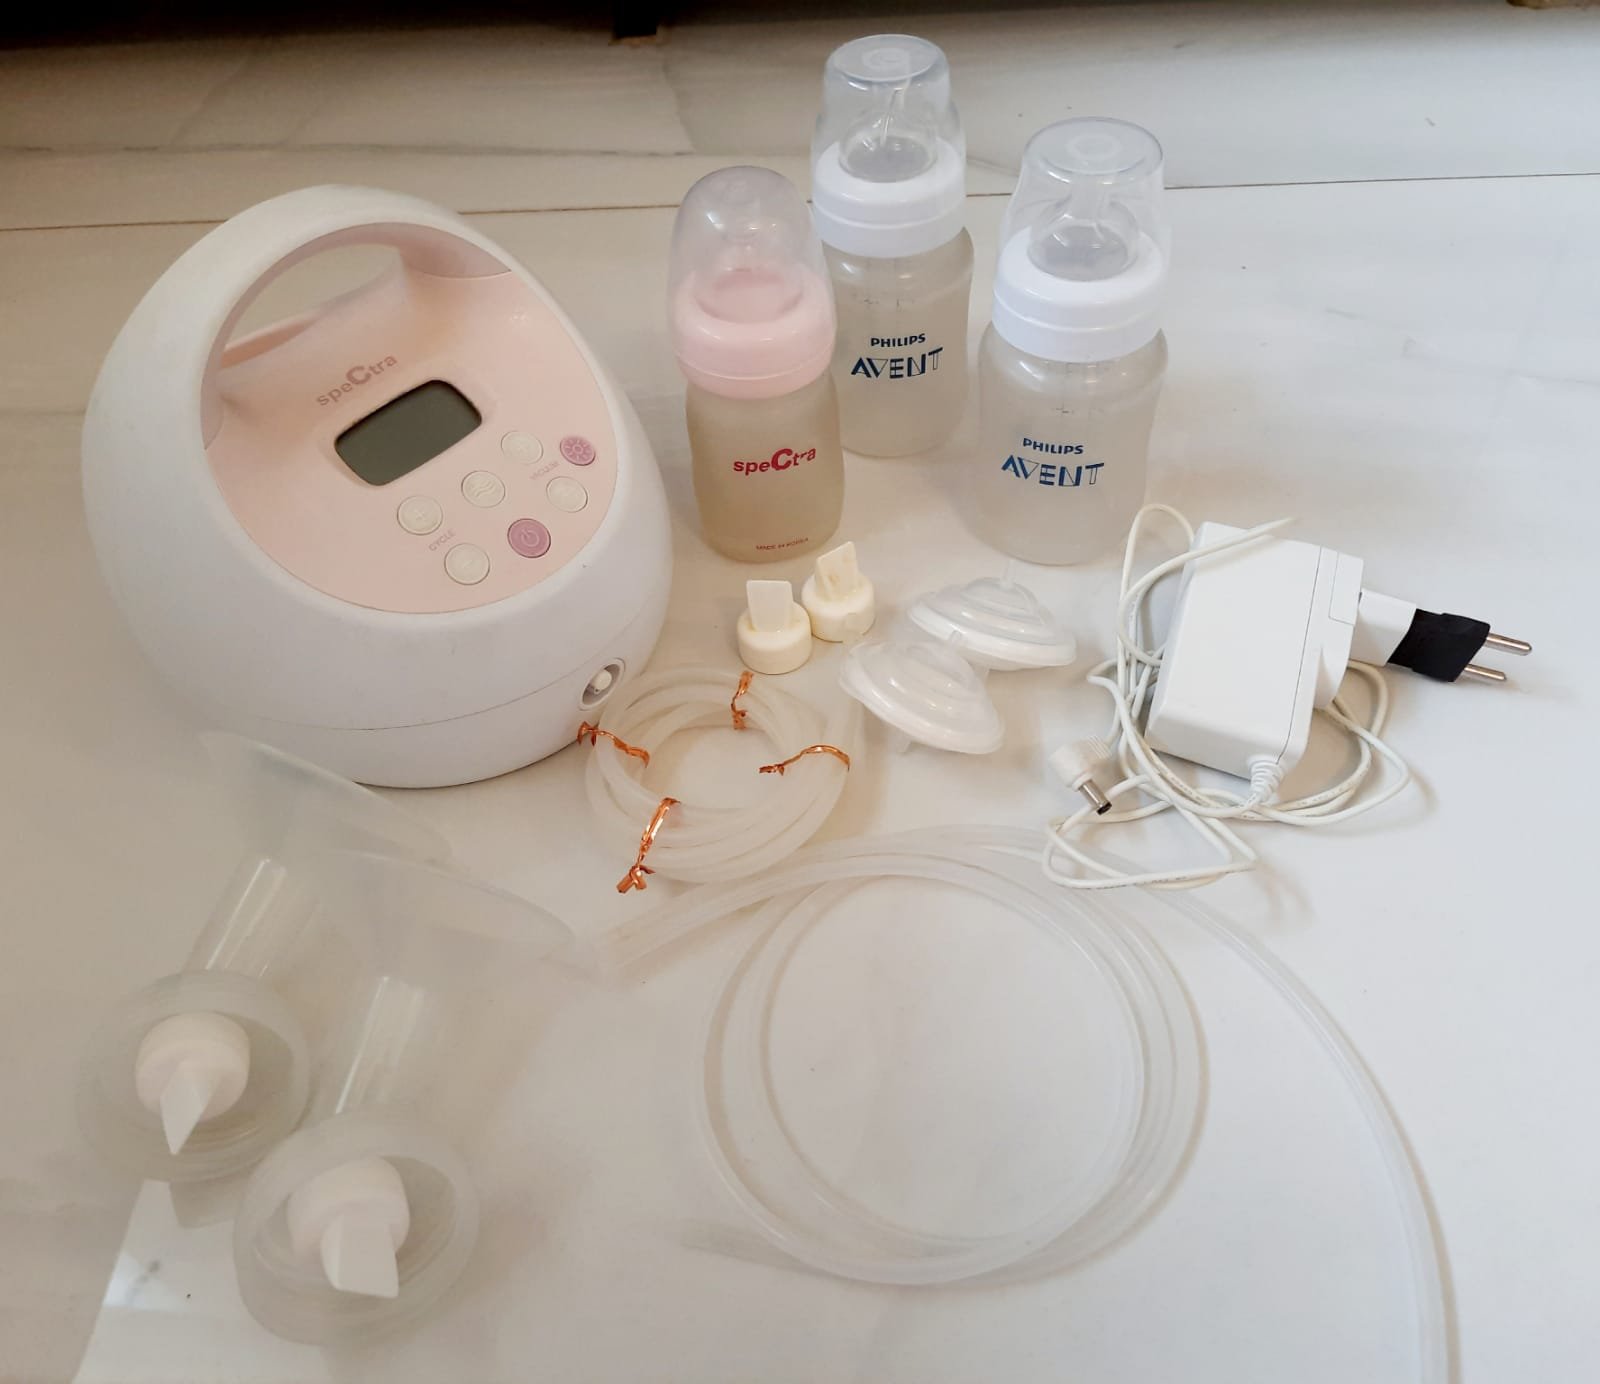 Spectra S2 Electric Breast Pump